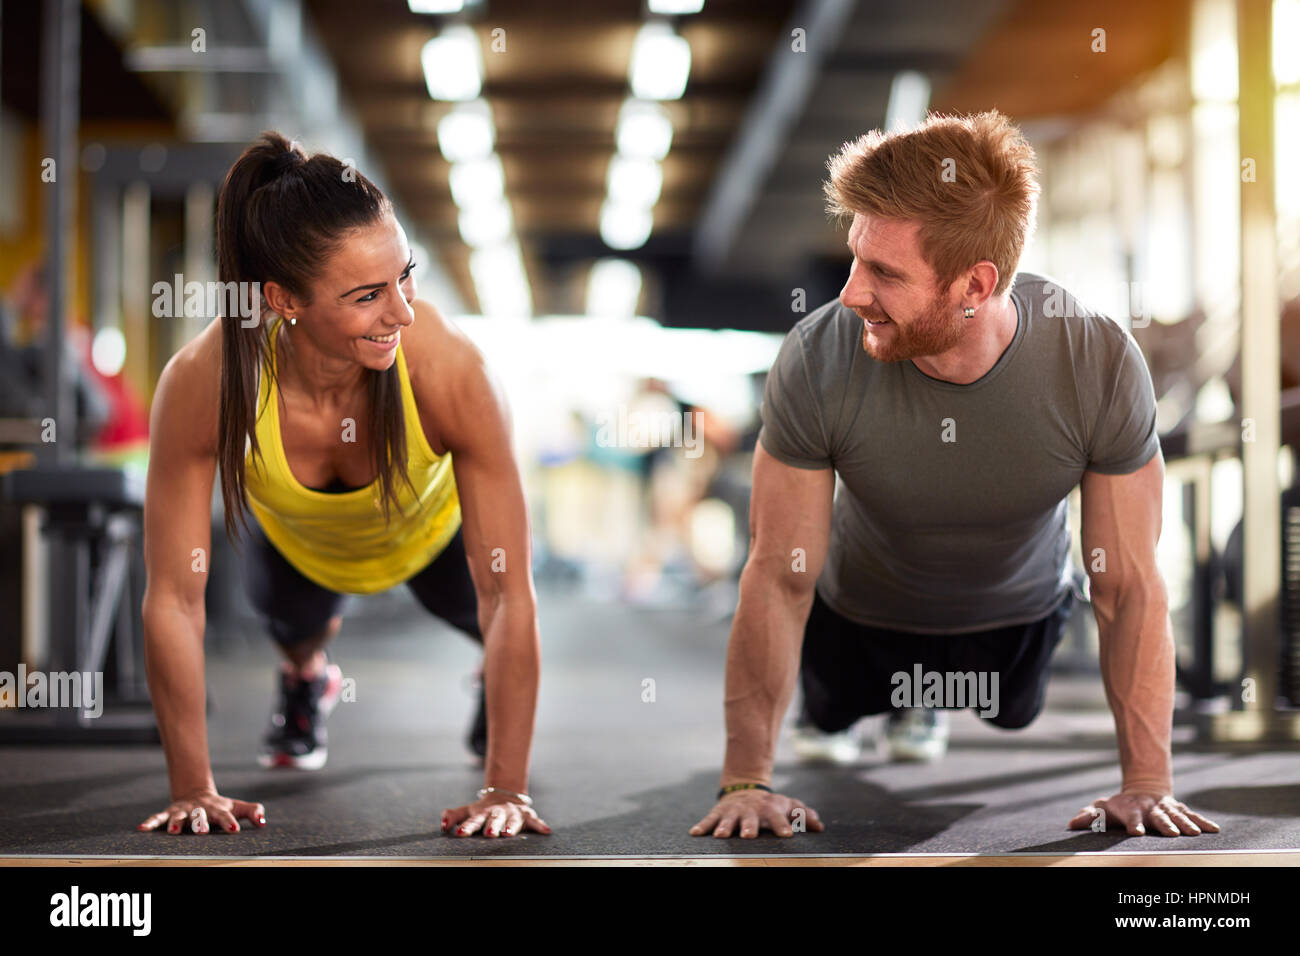 Female and male compete in endurance on fitness training Stock Photo